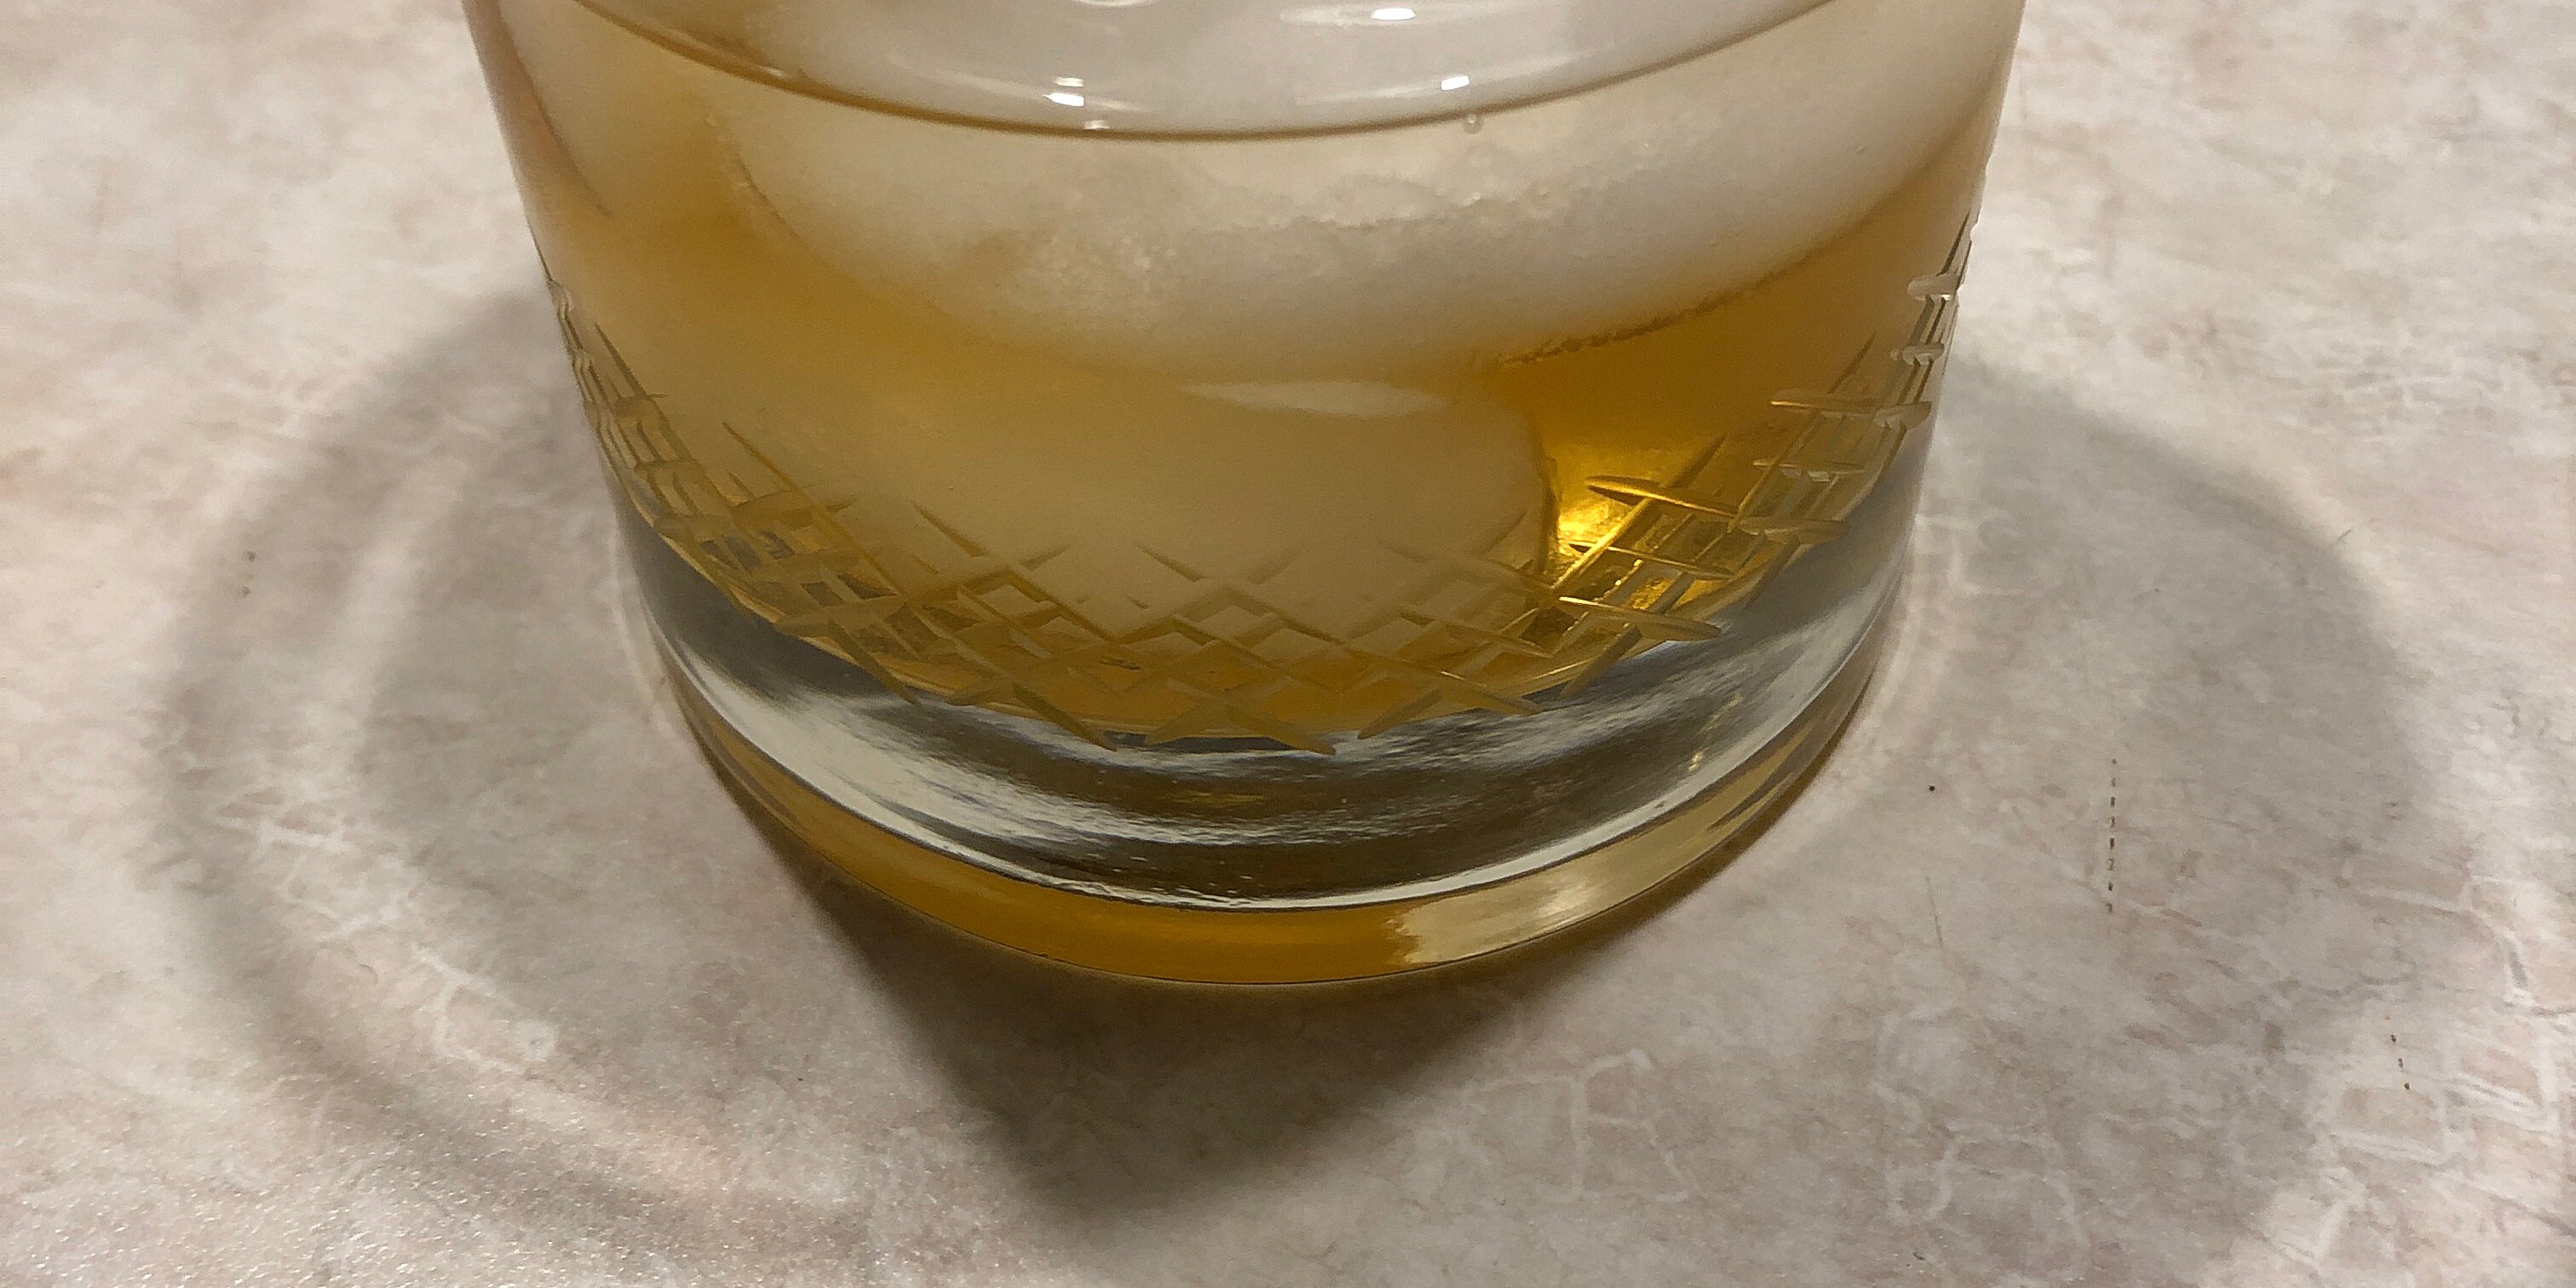 rusty nail cocktail